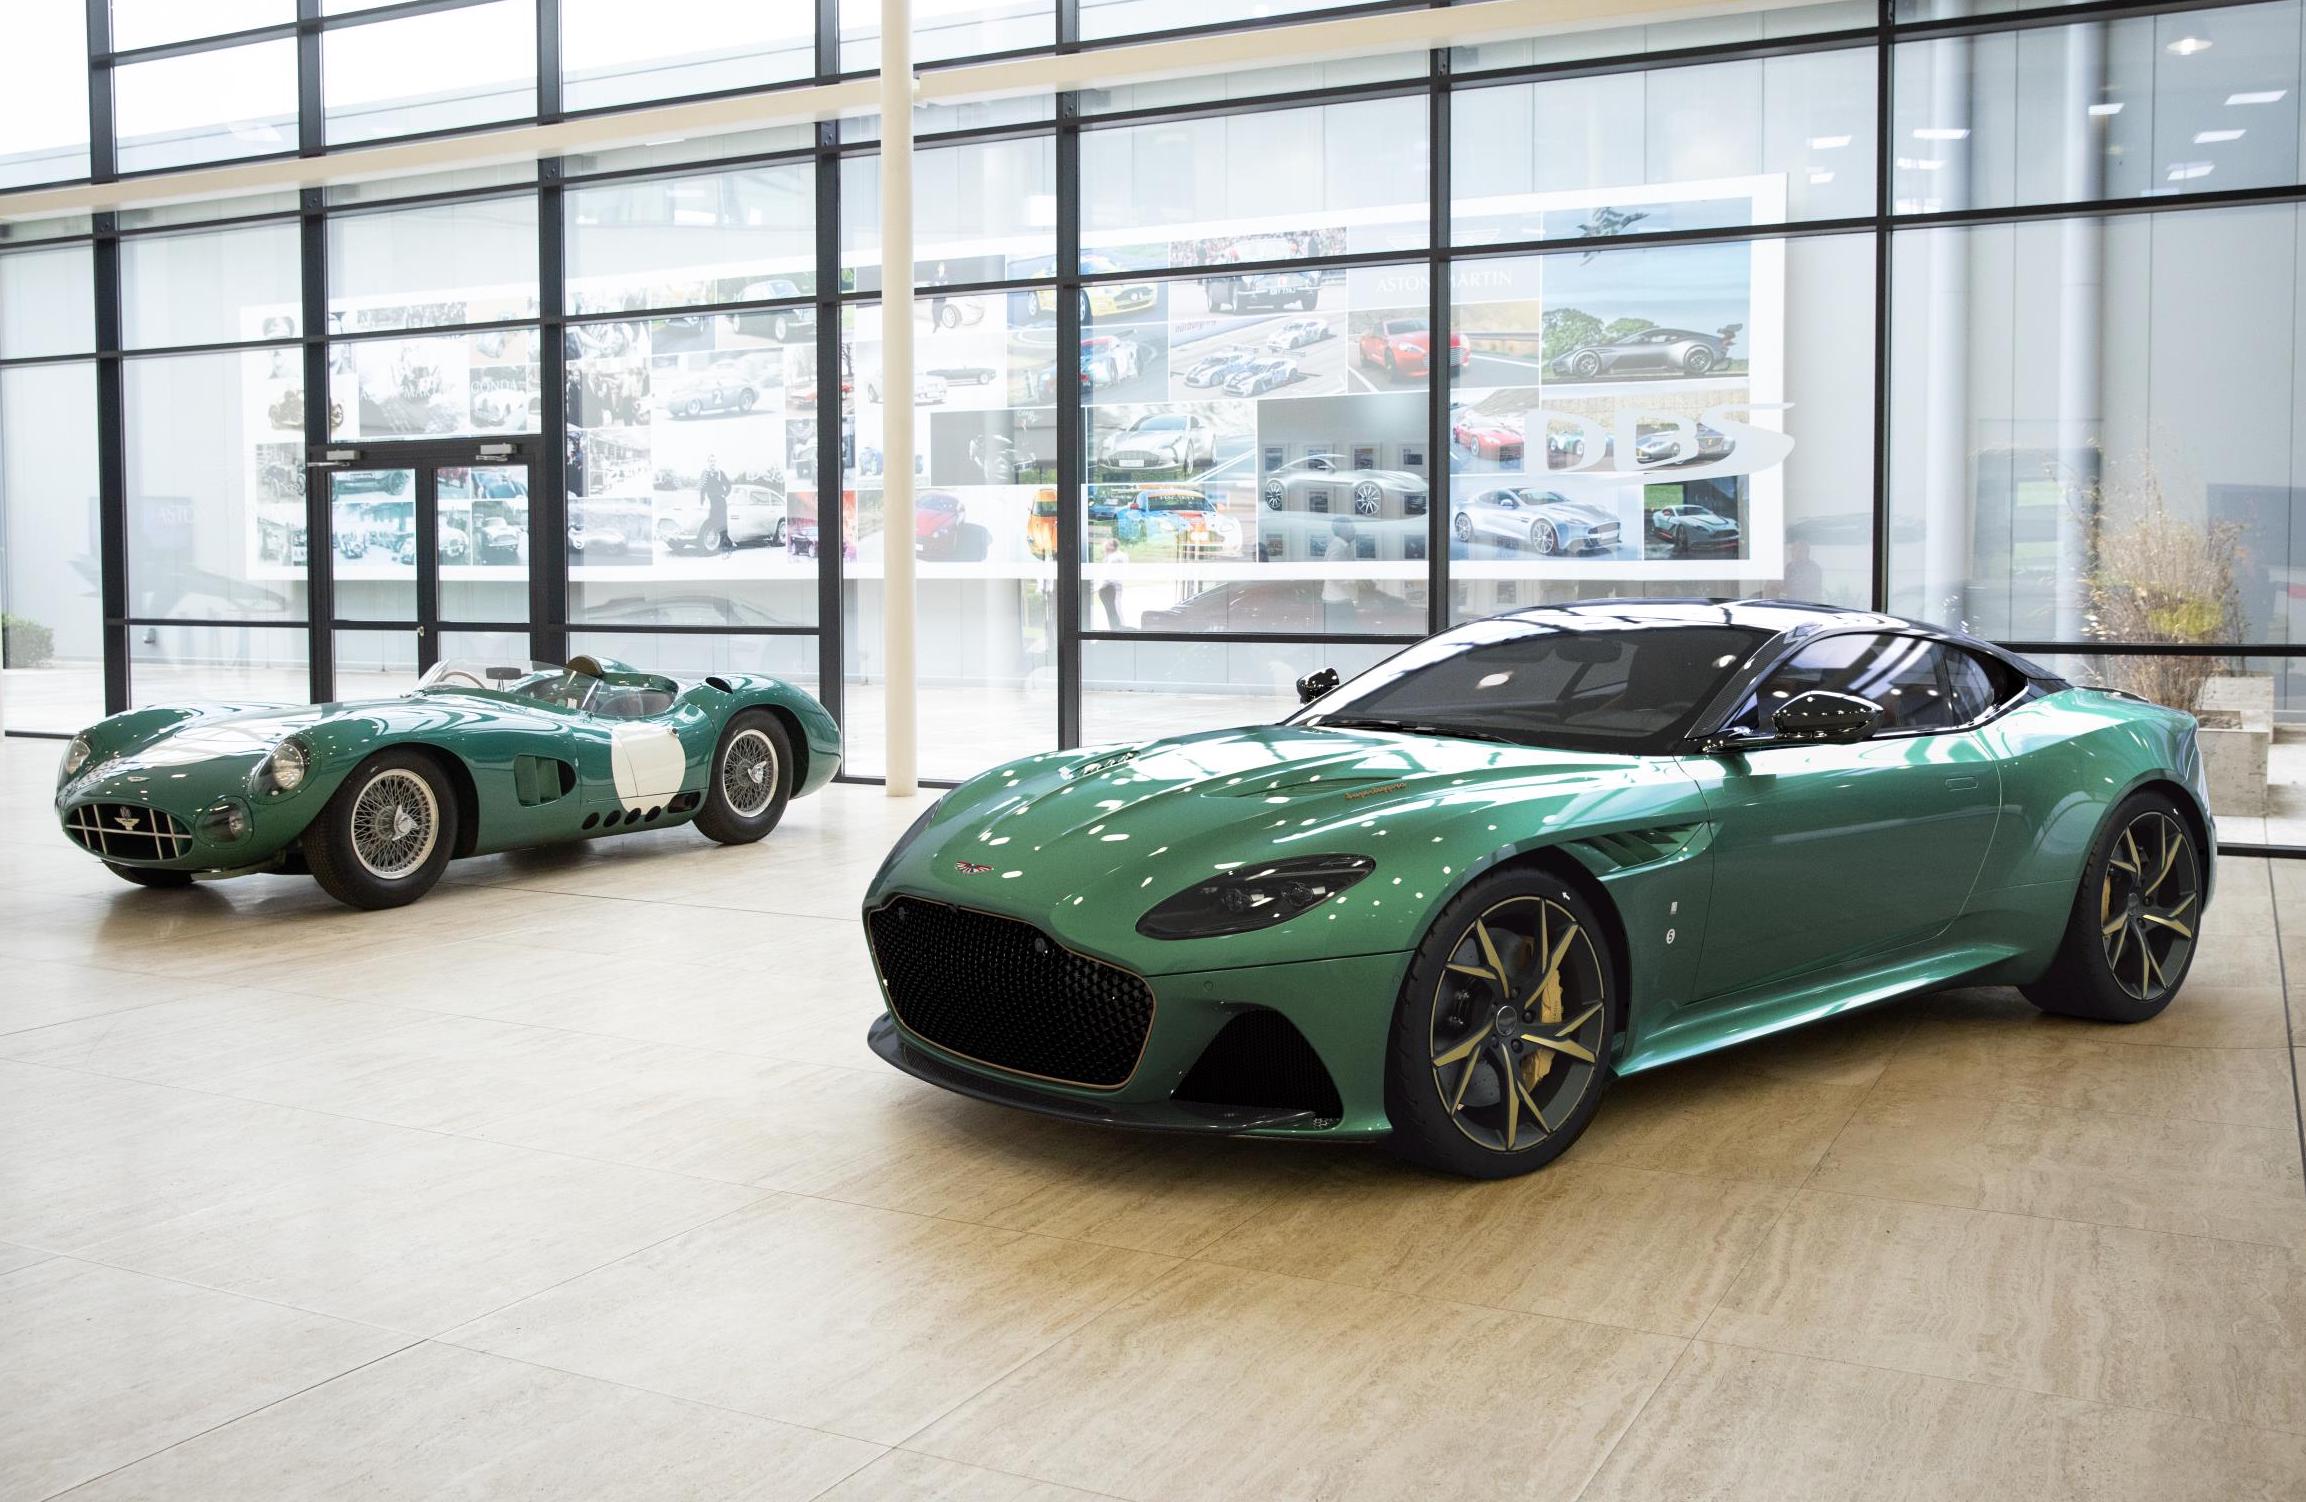 Aston Martin DBS 59 revealed, tribute to DBR1 Le Mans win